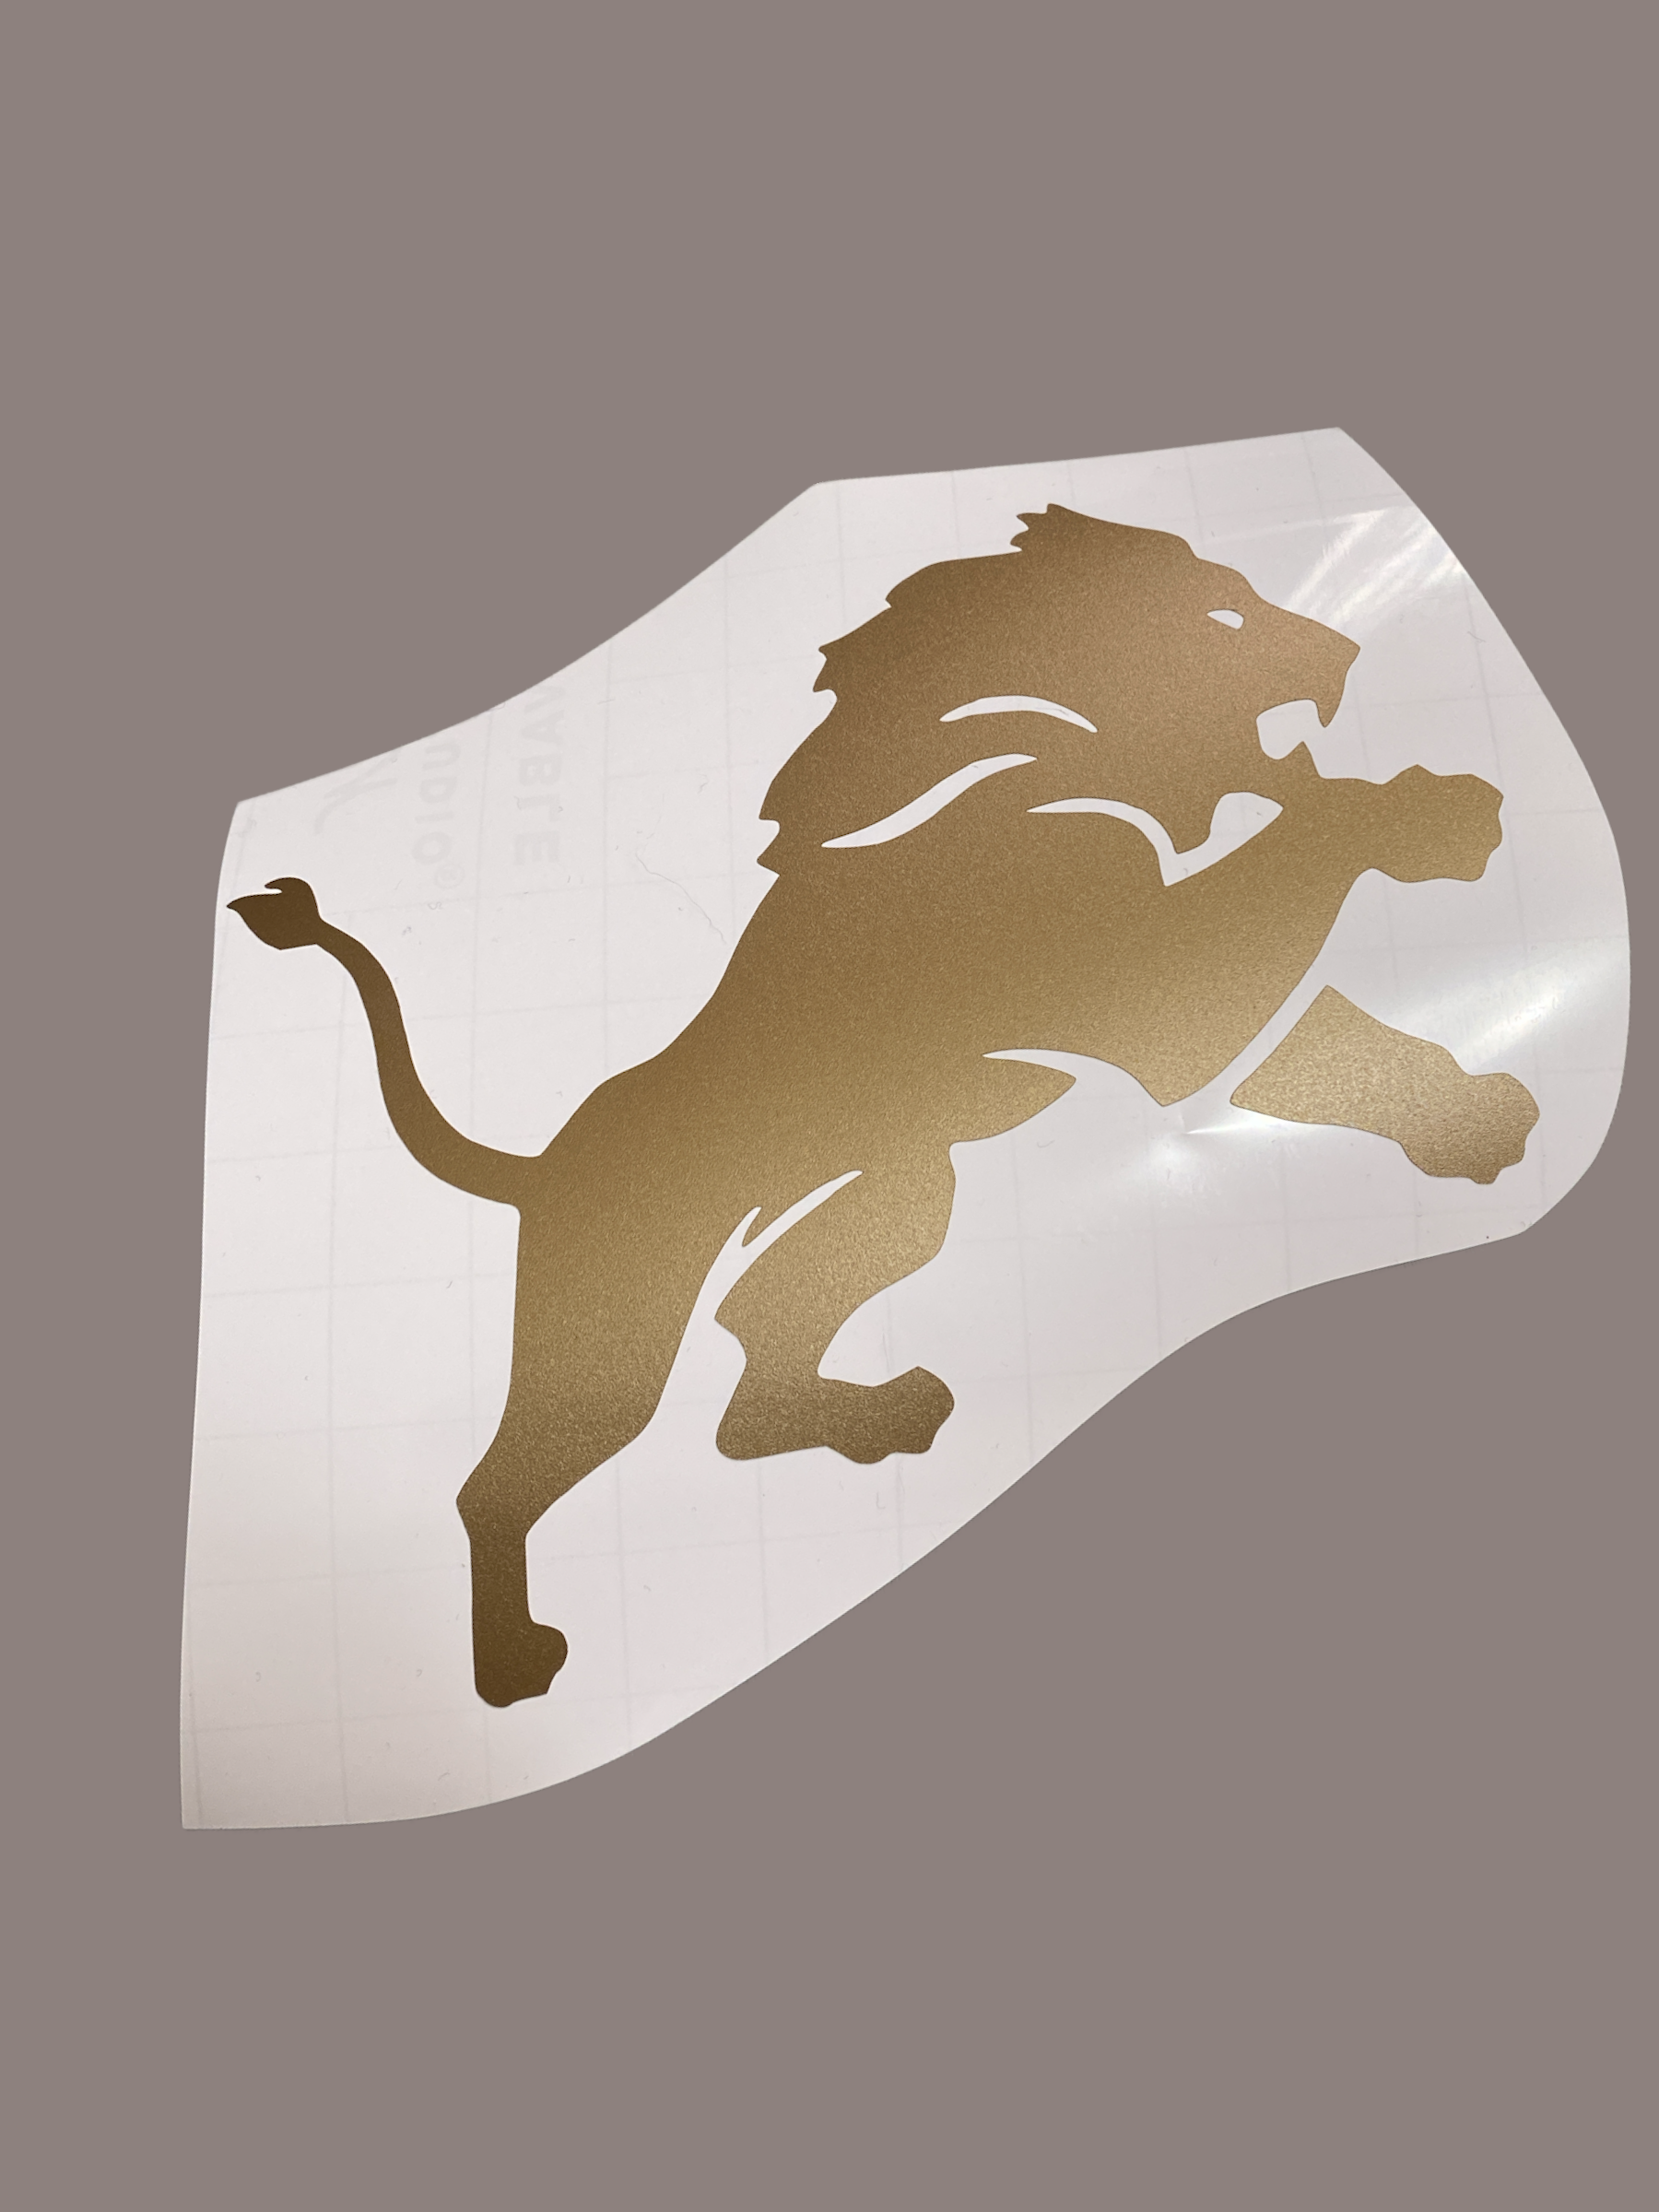 Leaping Lion decal 5" TG